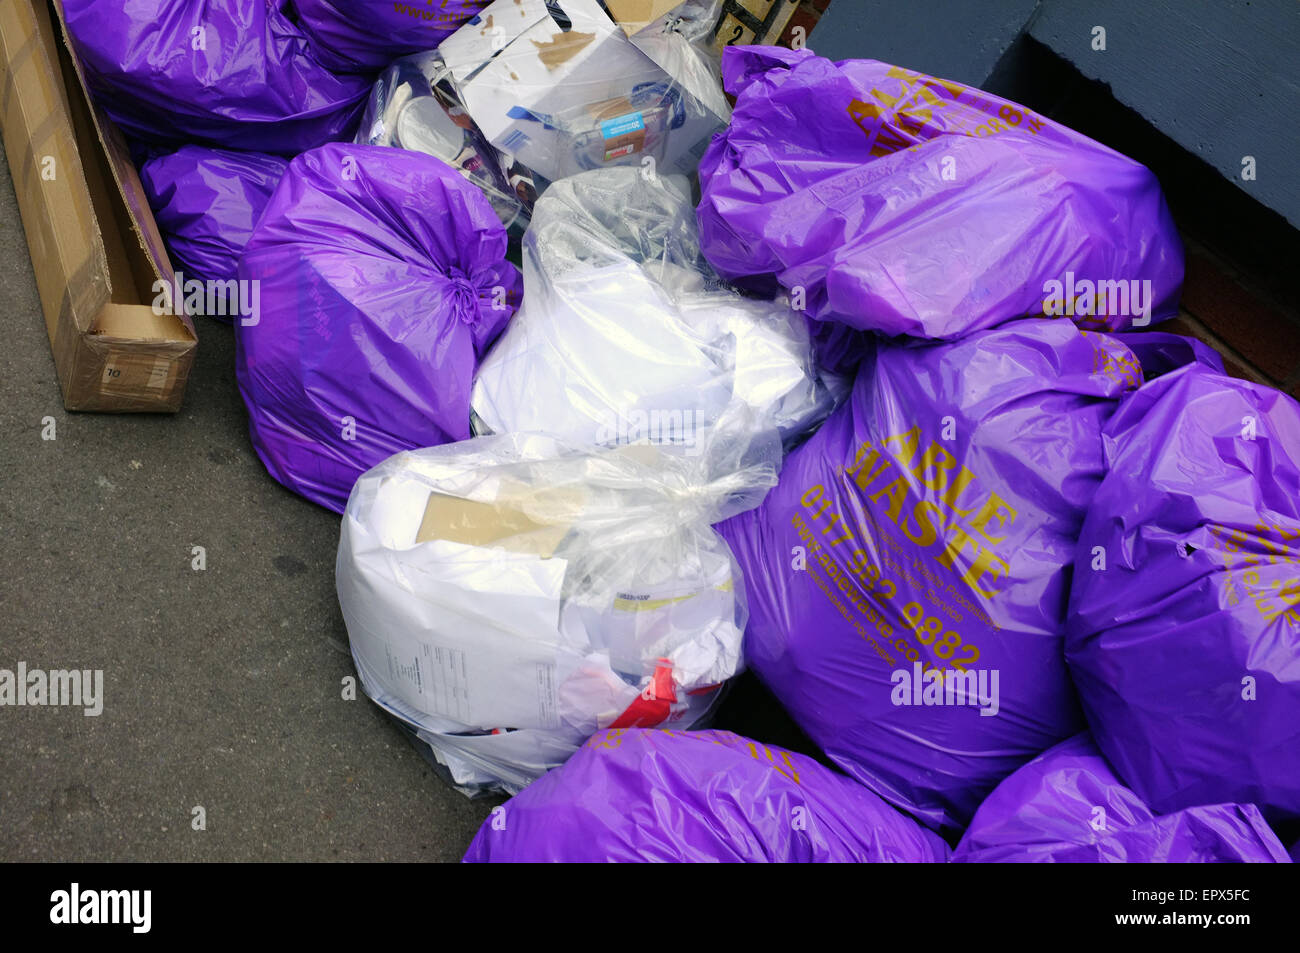 https://c8.alamy.com/comp/EPX5FC/piles-of-white-and-purple-bin-bags-in-bristol-uk-EPX5FC.jpg